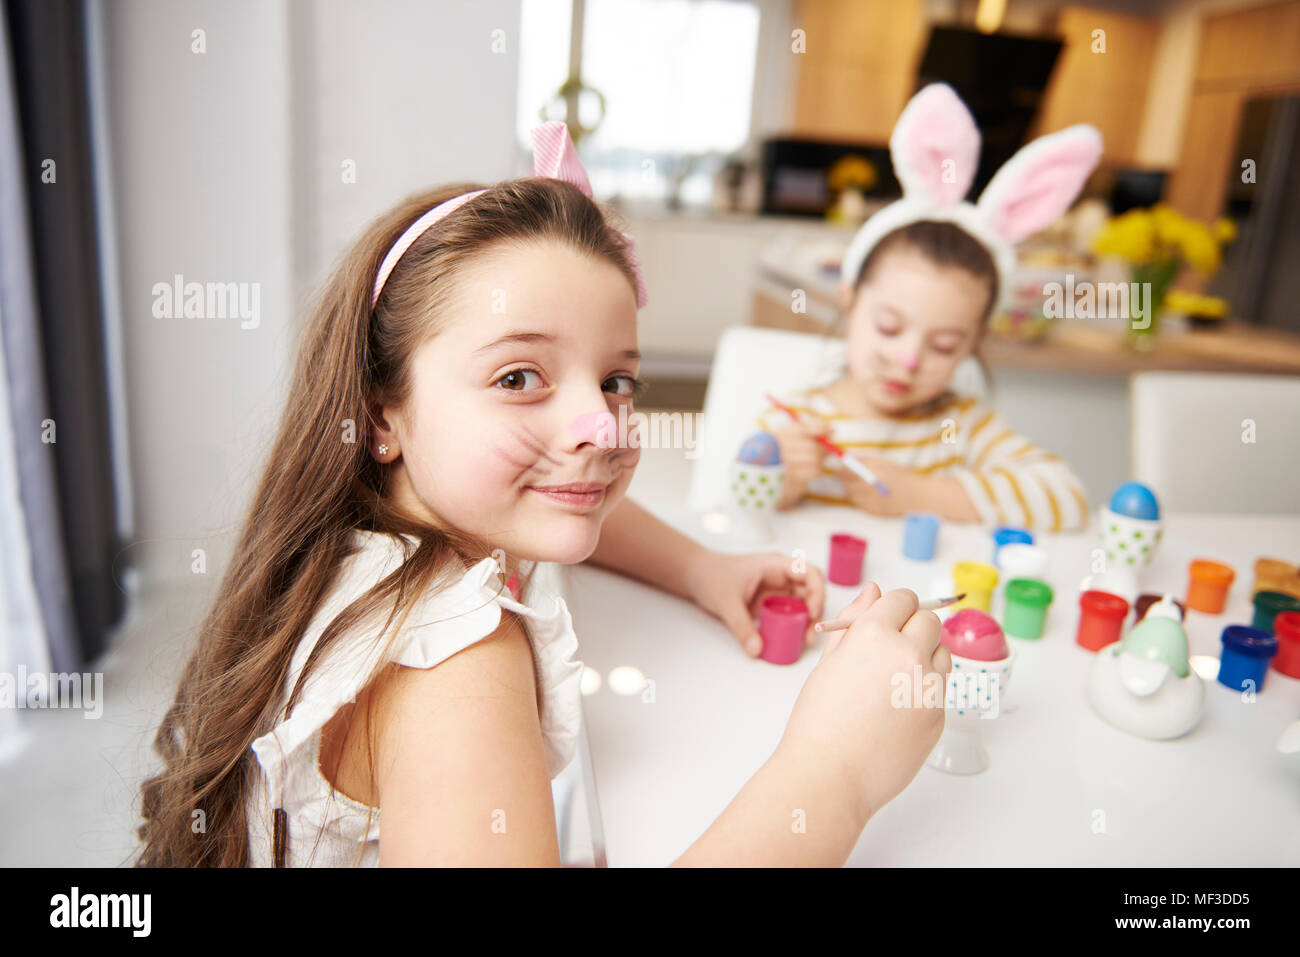 Portrait of smiling girl with sister sitting at table painting Easter eggs Stock Photo